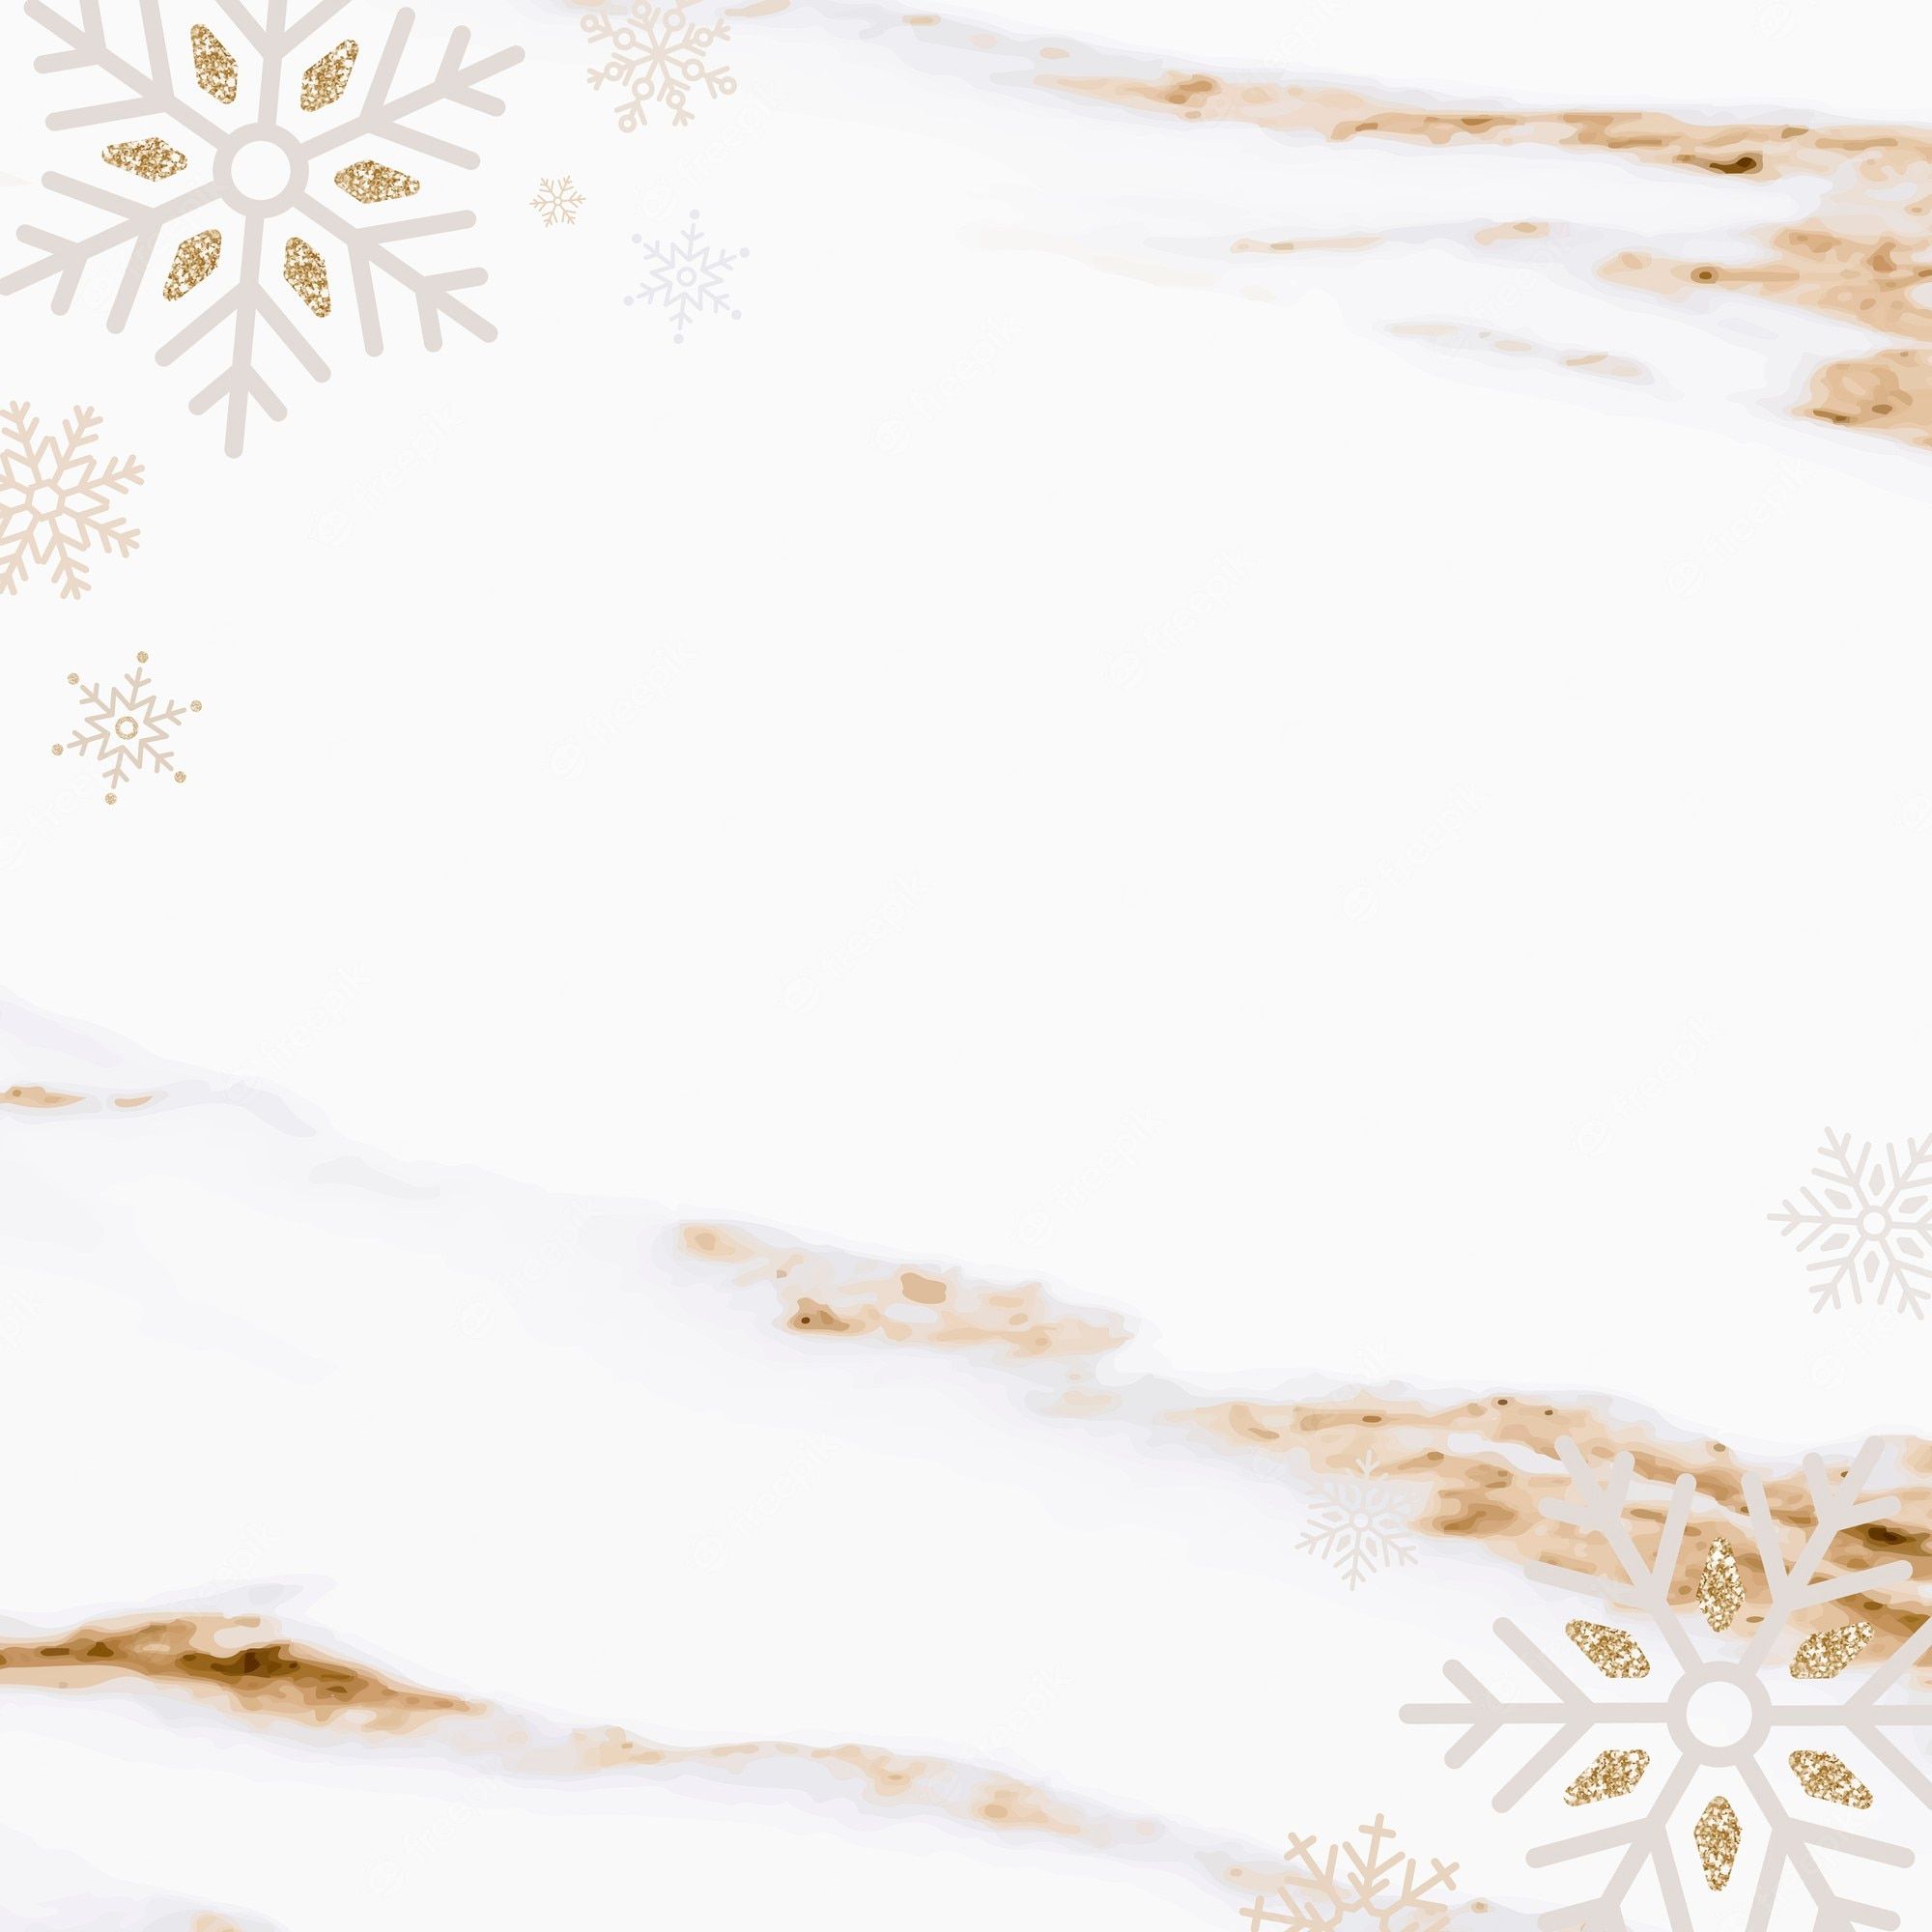 A gold and white marble background with snowflakes - White Christmas